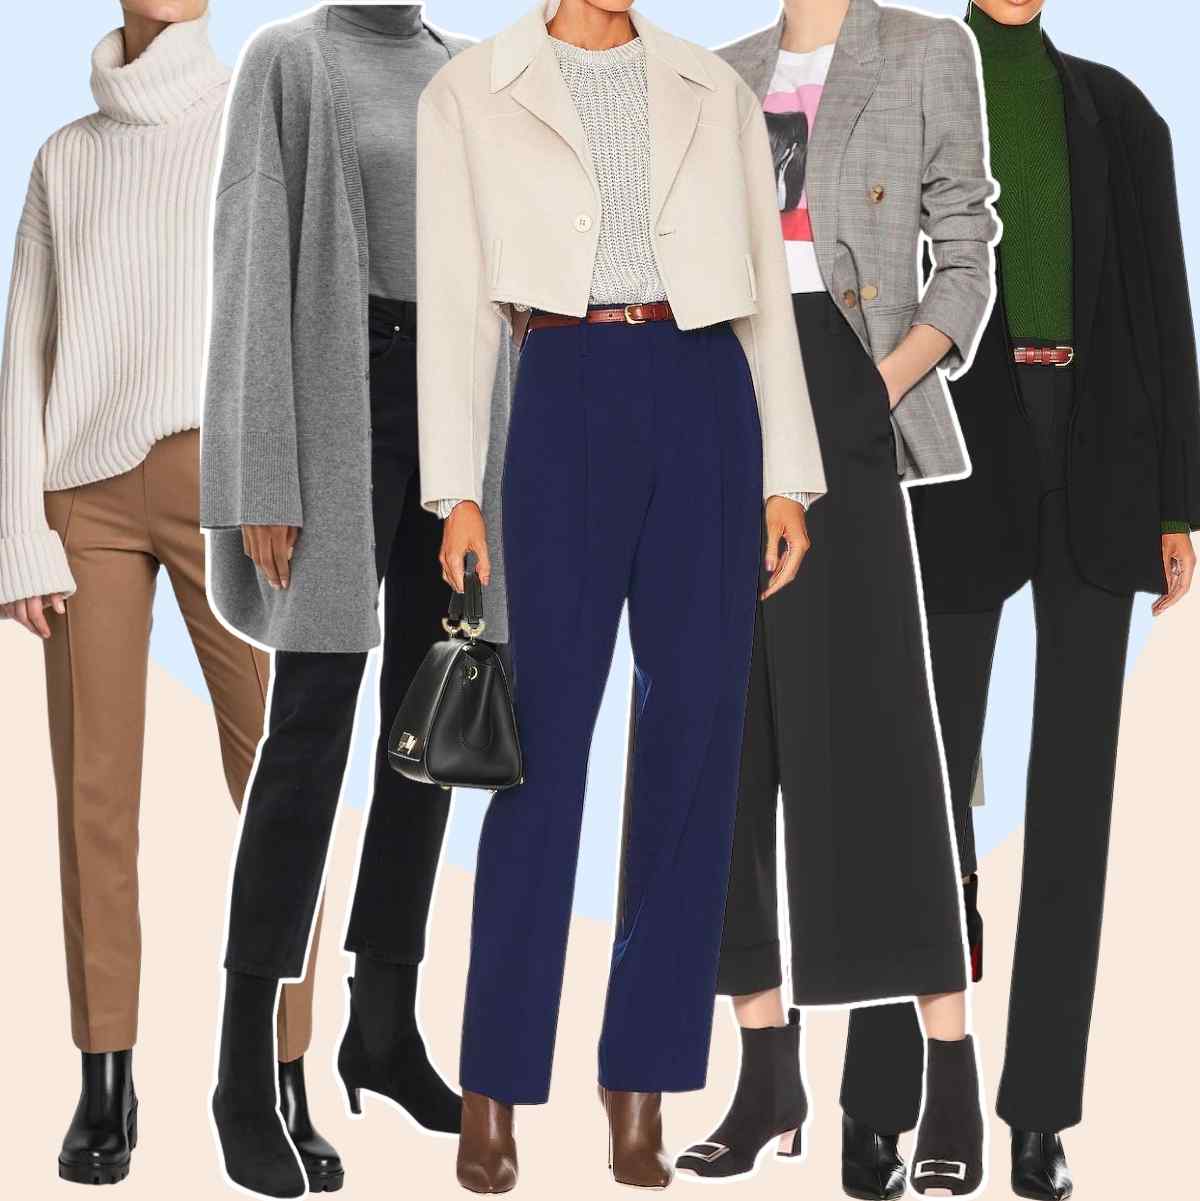 Collage of 5 women wearing different ankle boots with dress pants for work.